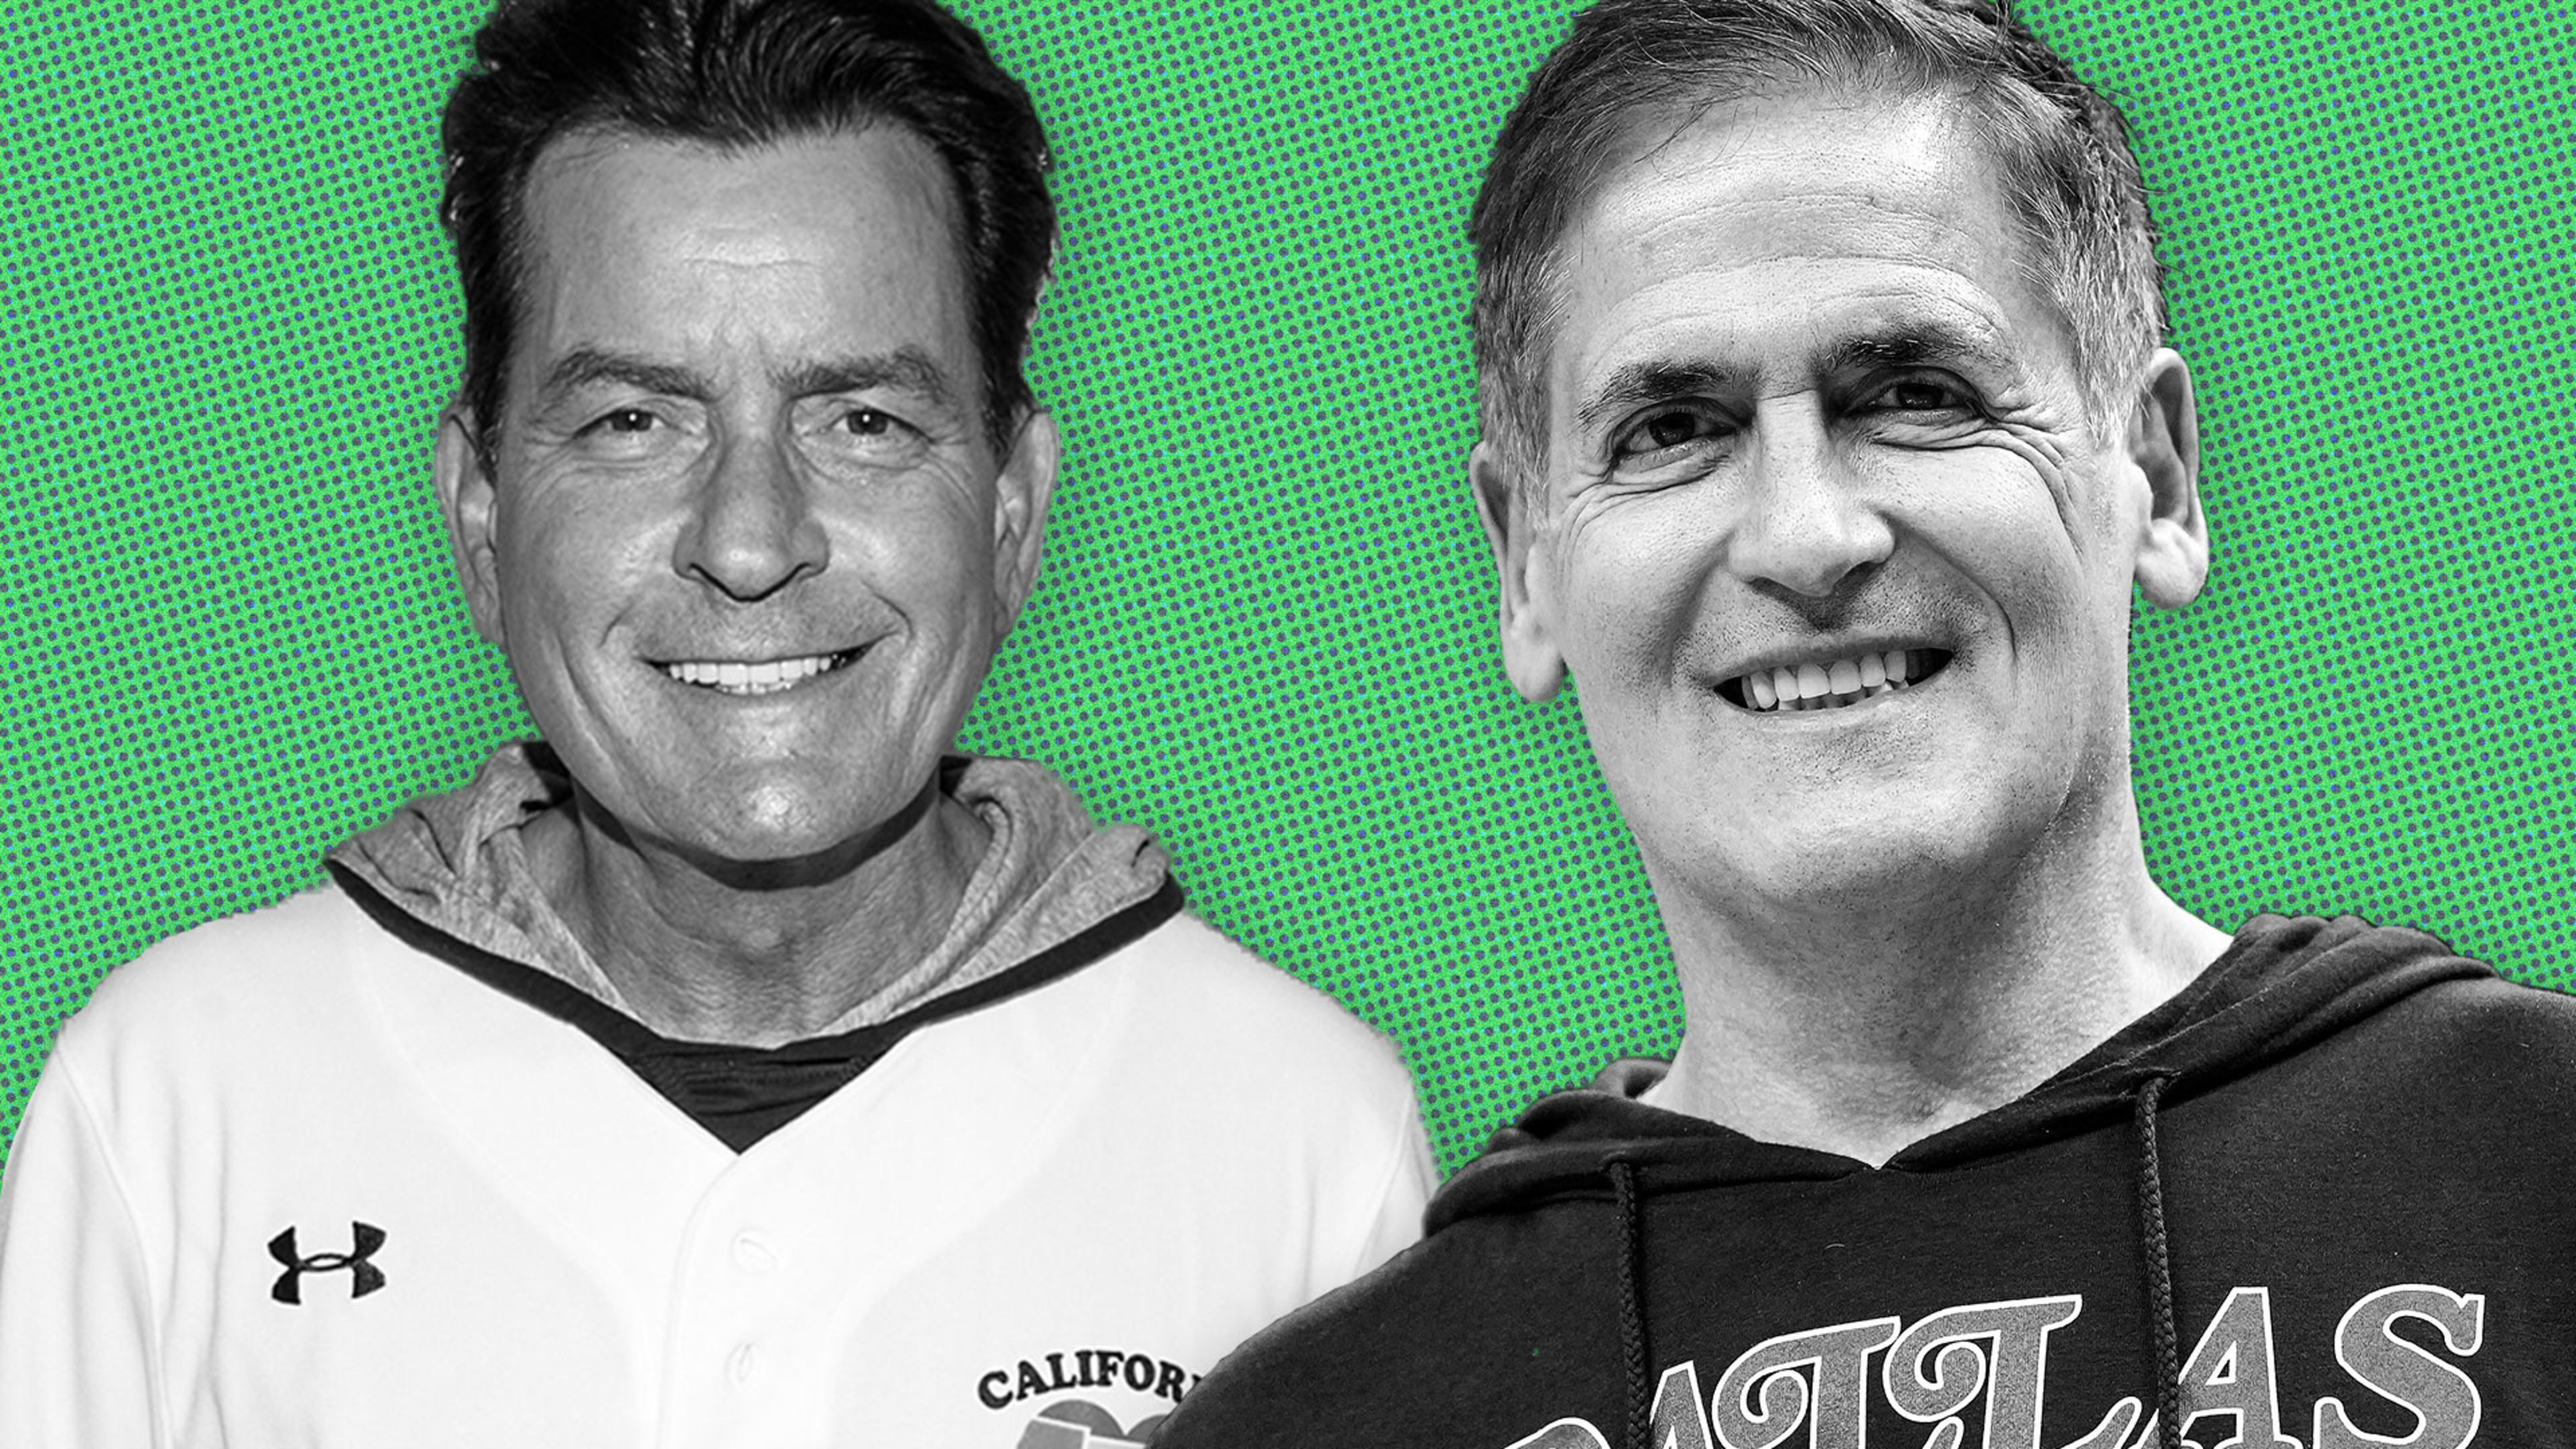 Mark Cuban, Charlie Sheen, and the creators of ‘Entourage’ are teaming up to sell you an NFT